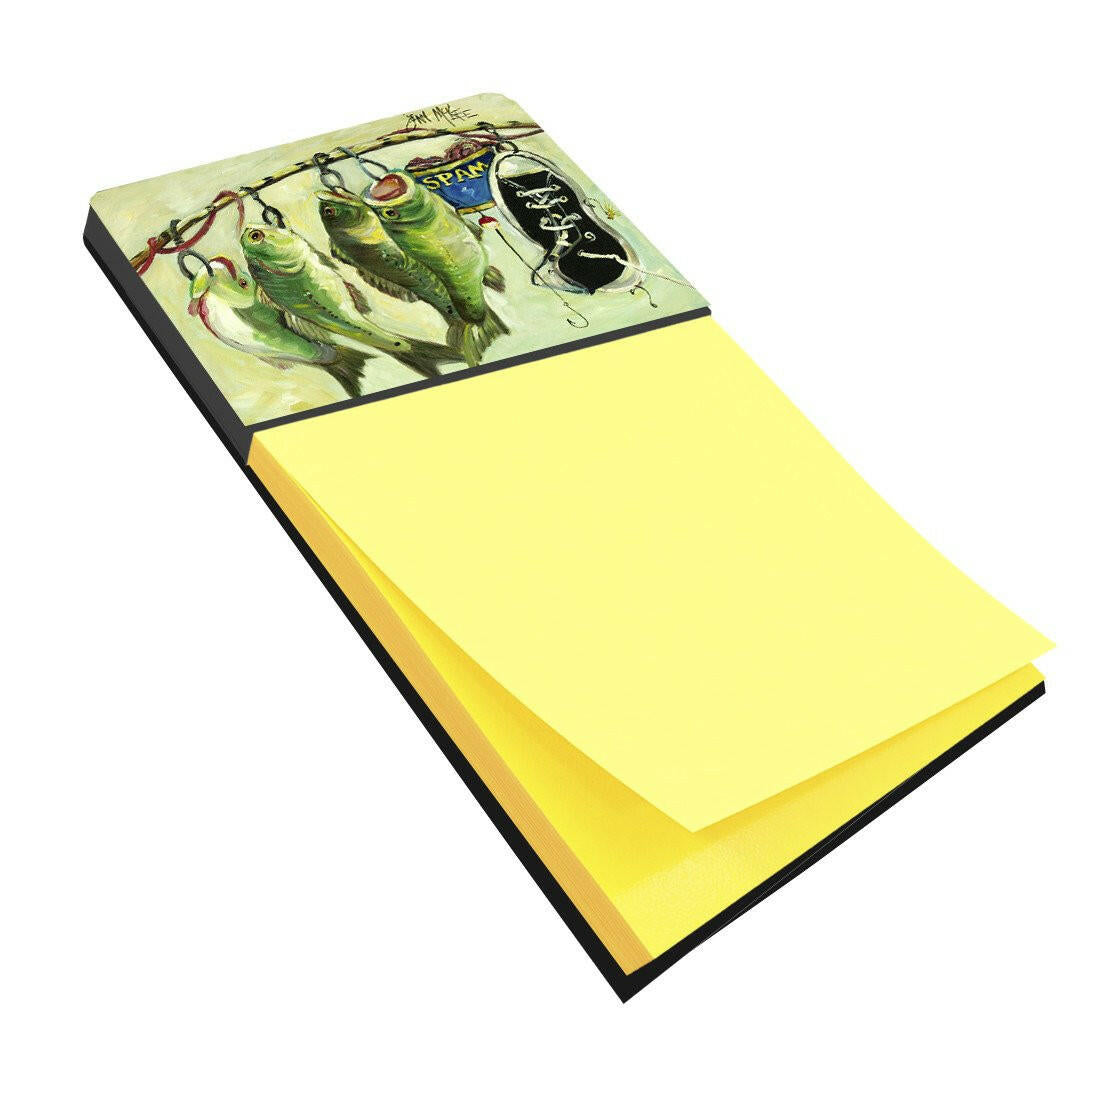 Recession Food Fish caught with Spam Sticky Note Holder JMK1113SN by Caroline's Treasures